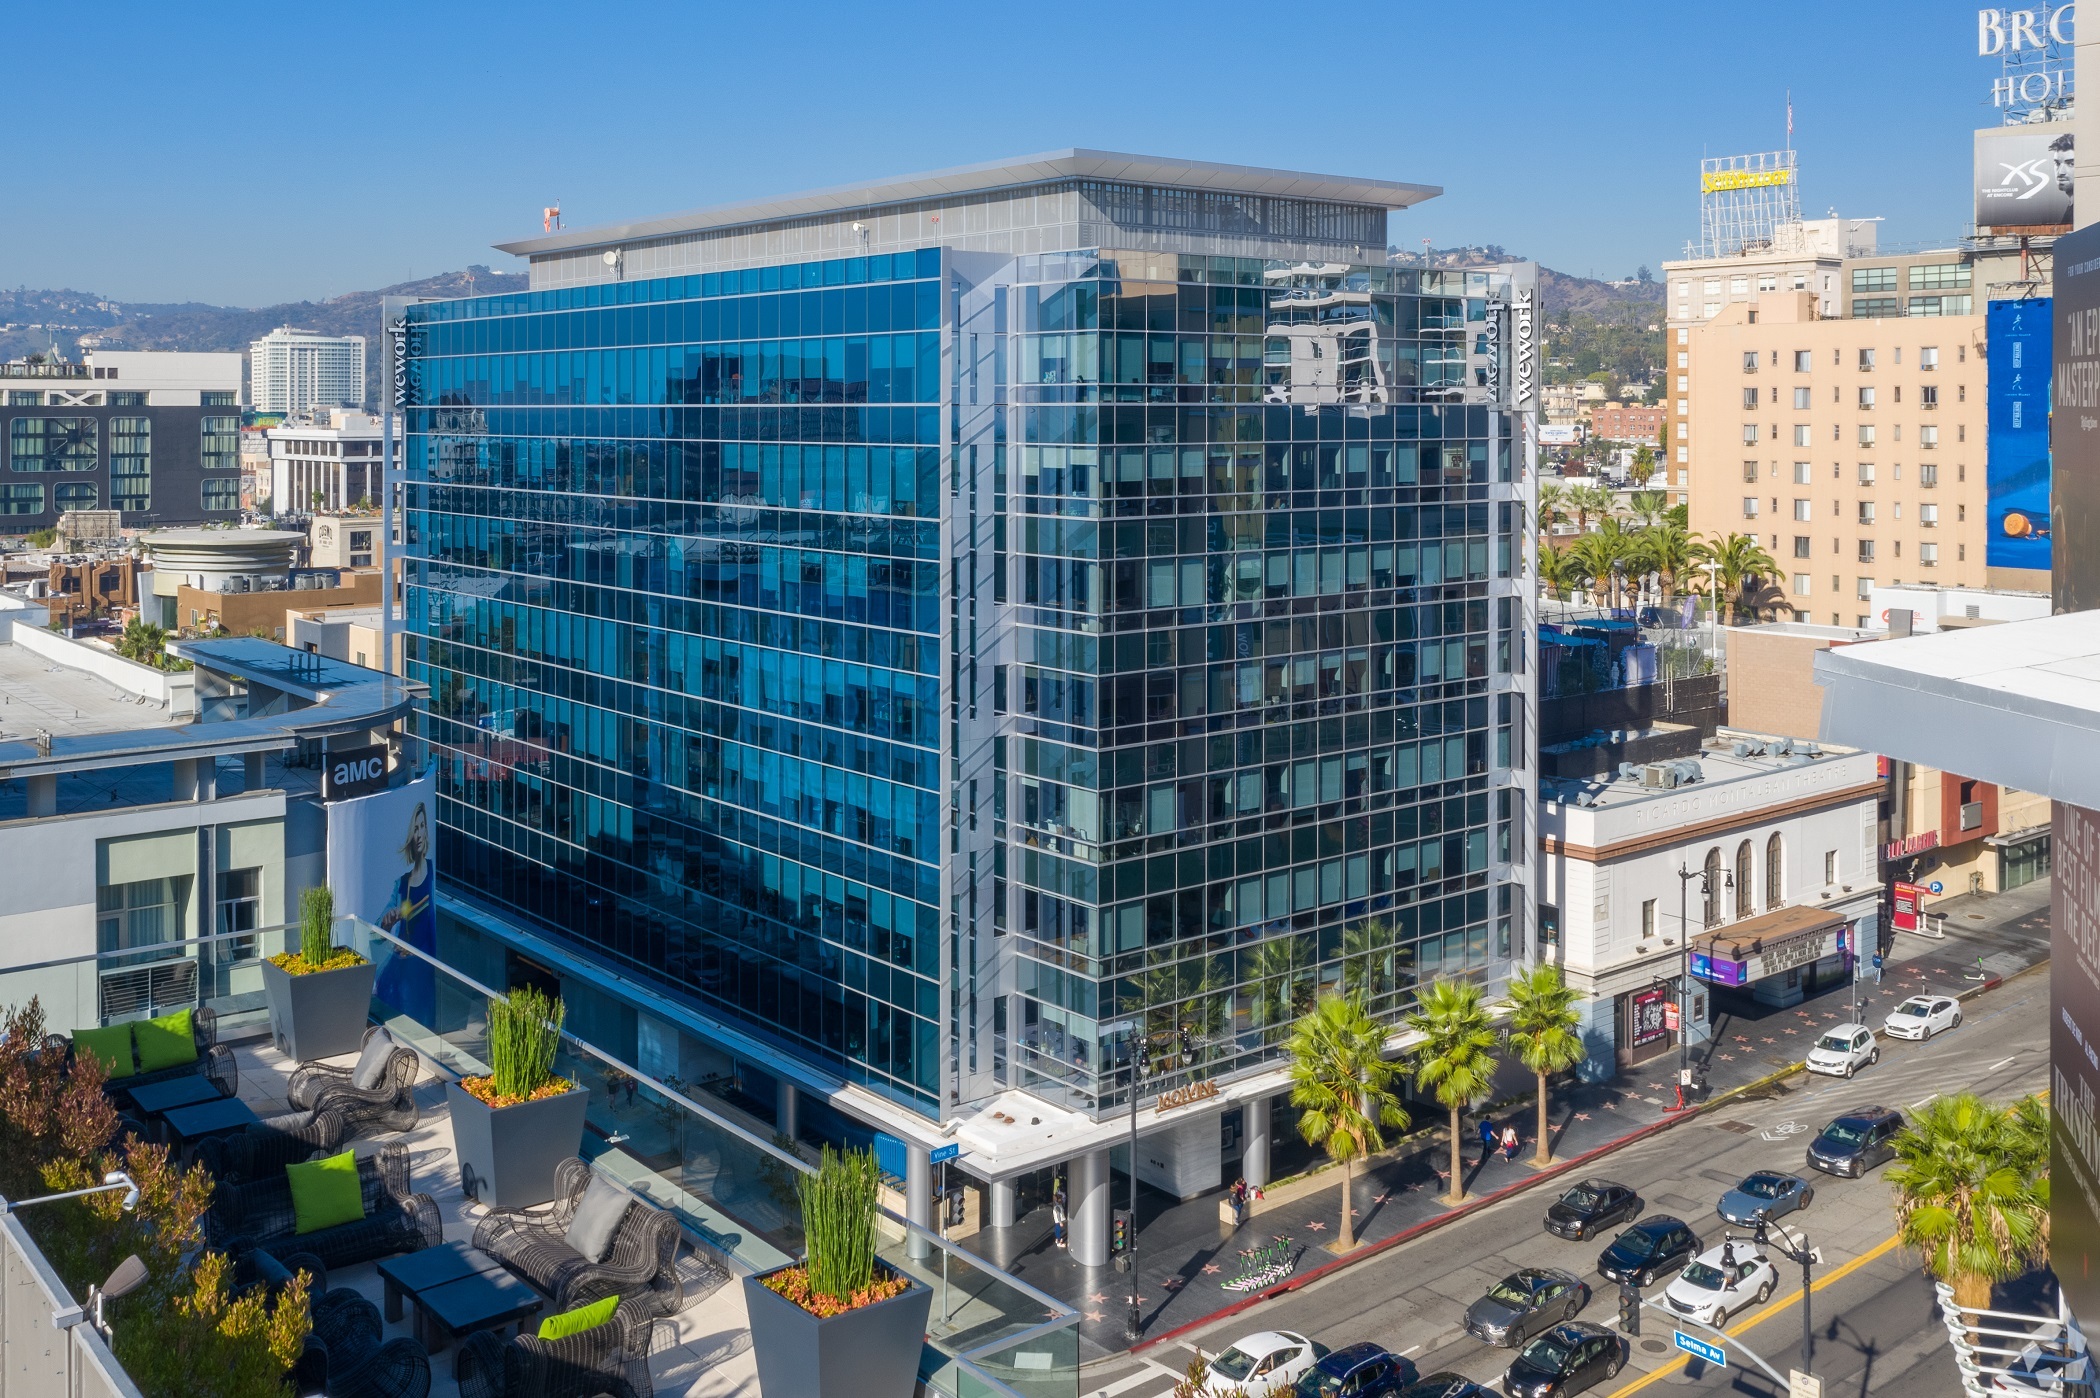 The roughly 115,000-square-foot 1601 Vine St. office is located in the heart of Hollywood in Los Angeles. (CoStar)